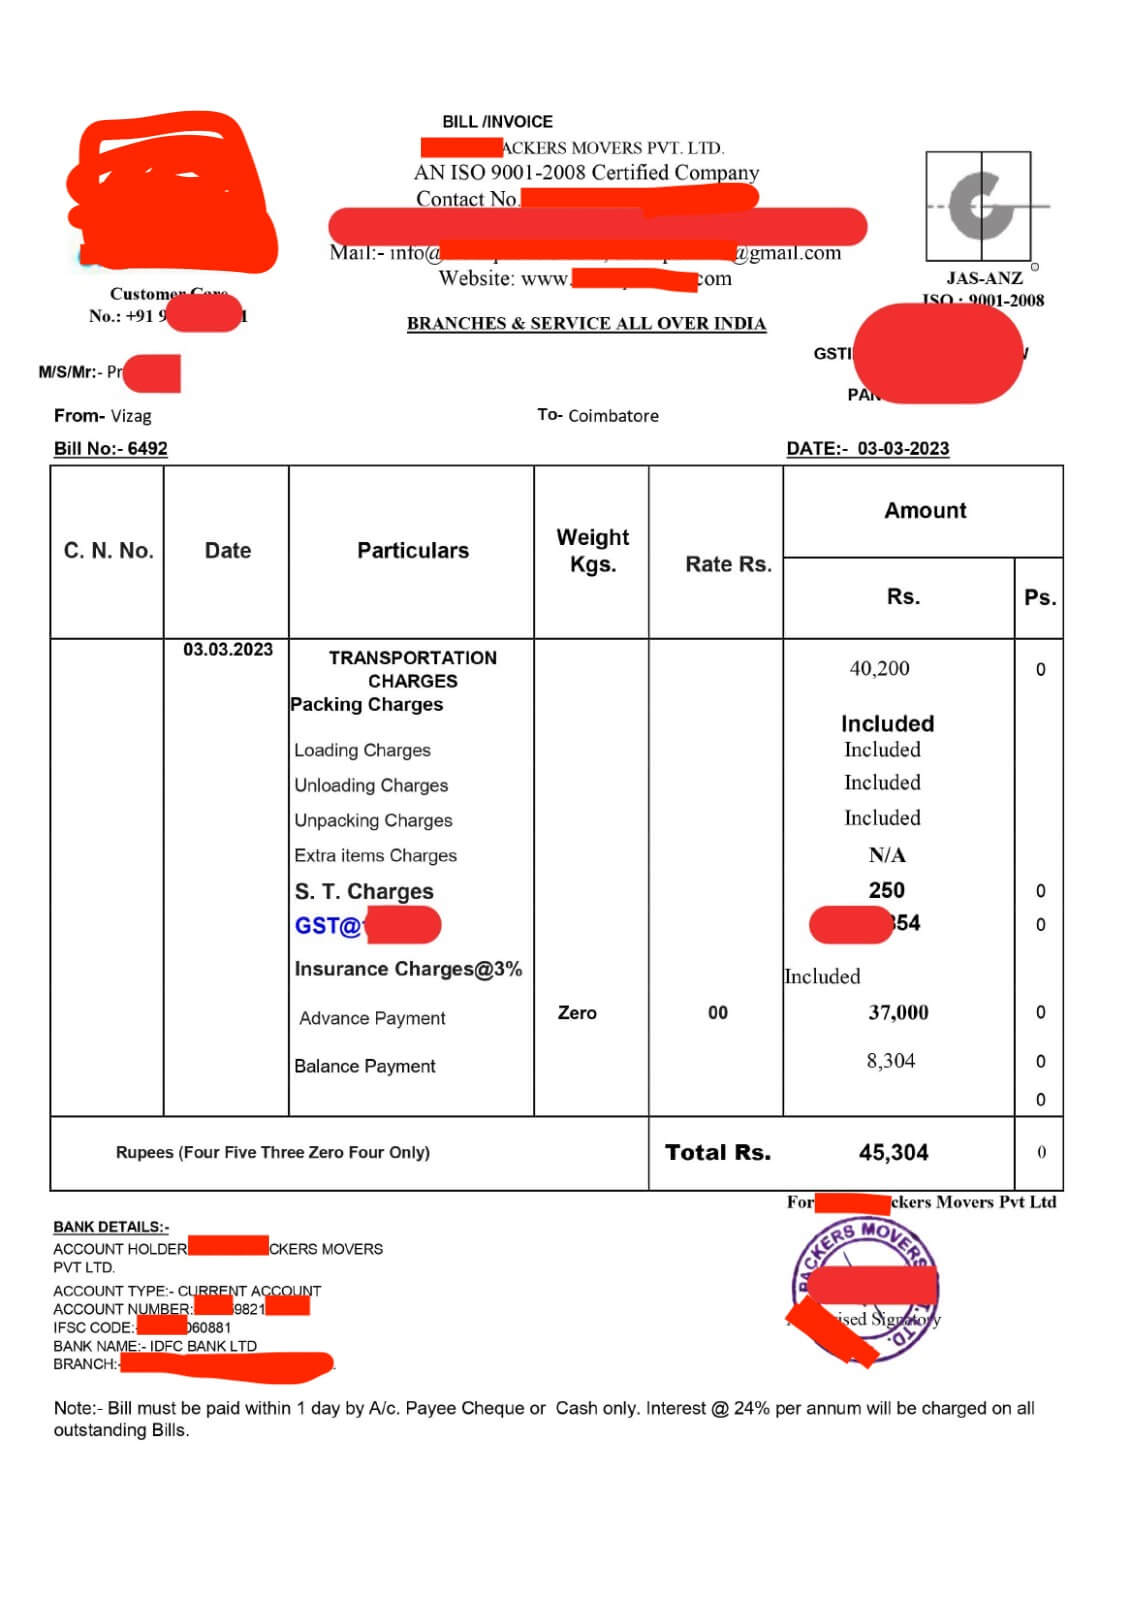 Second Smaple copy of packers and movers Bill or Invoice